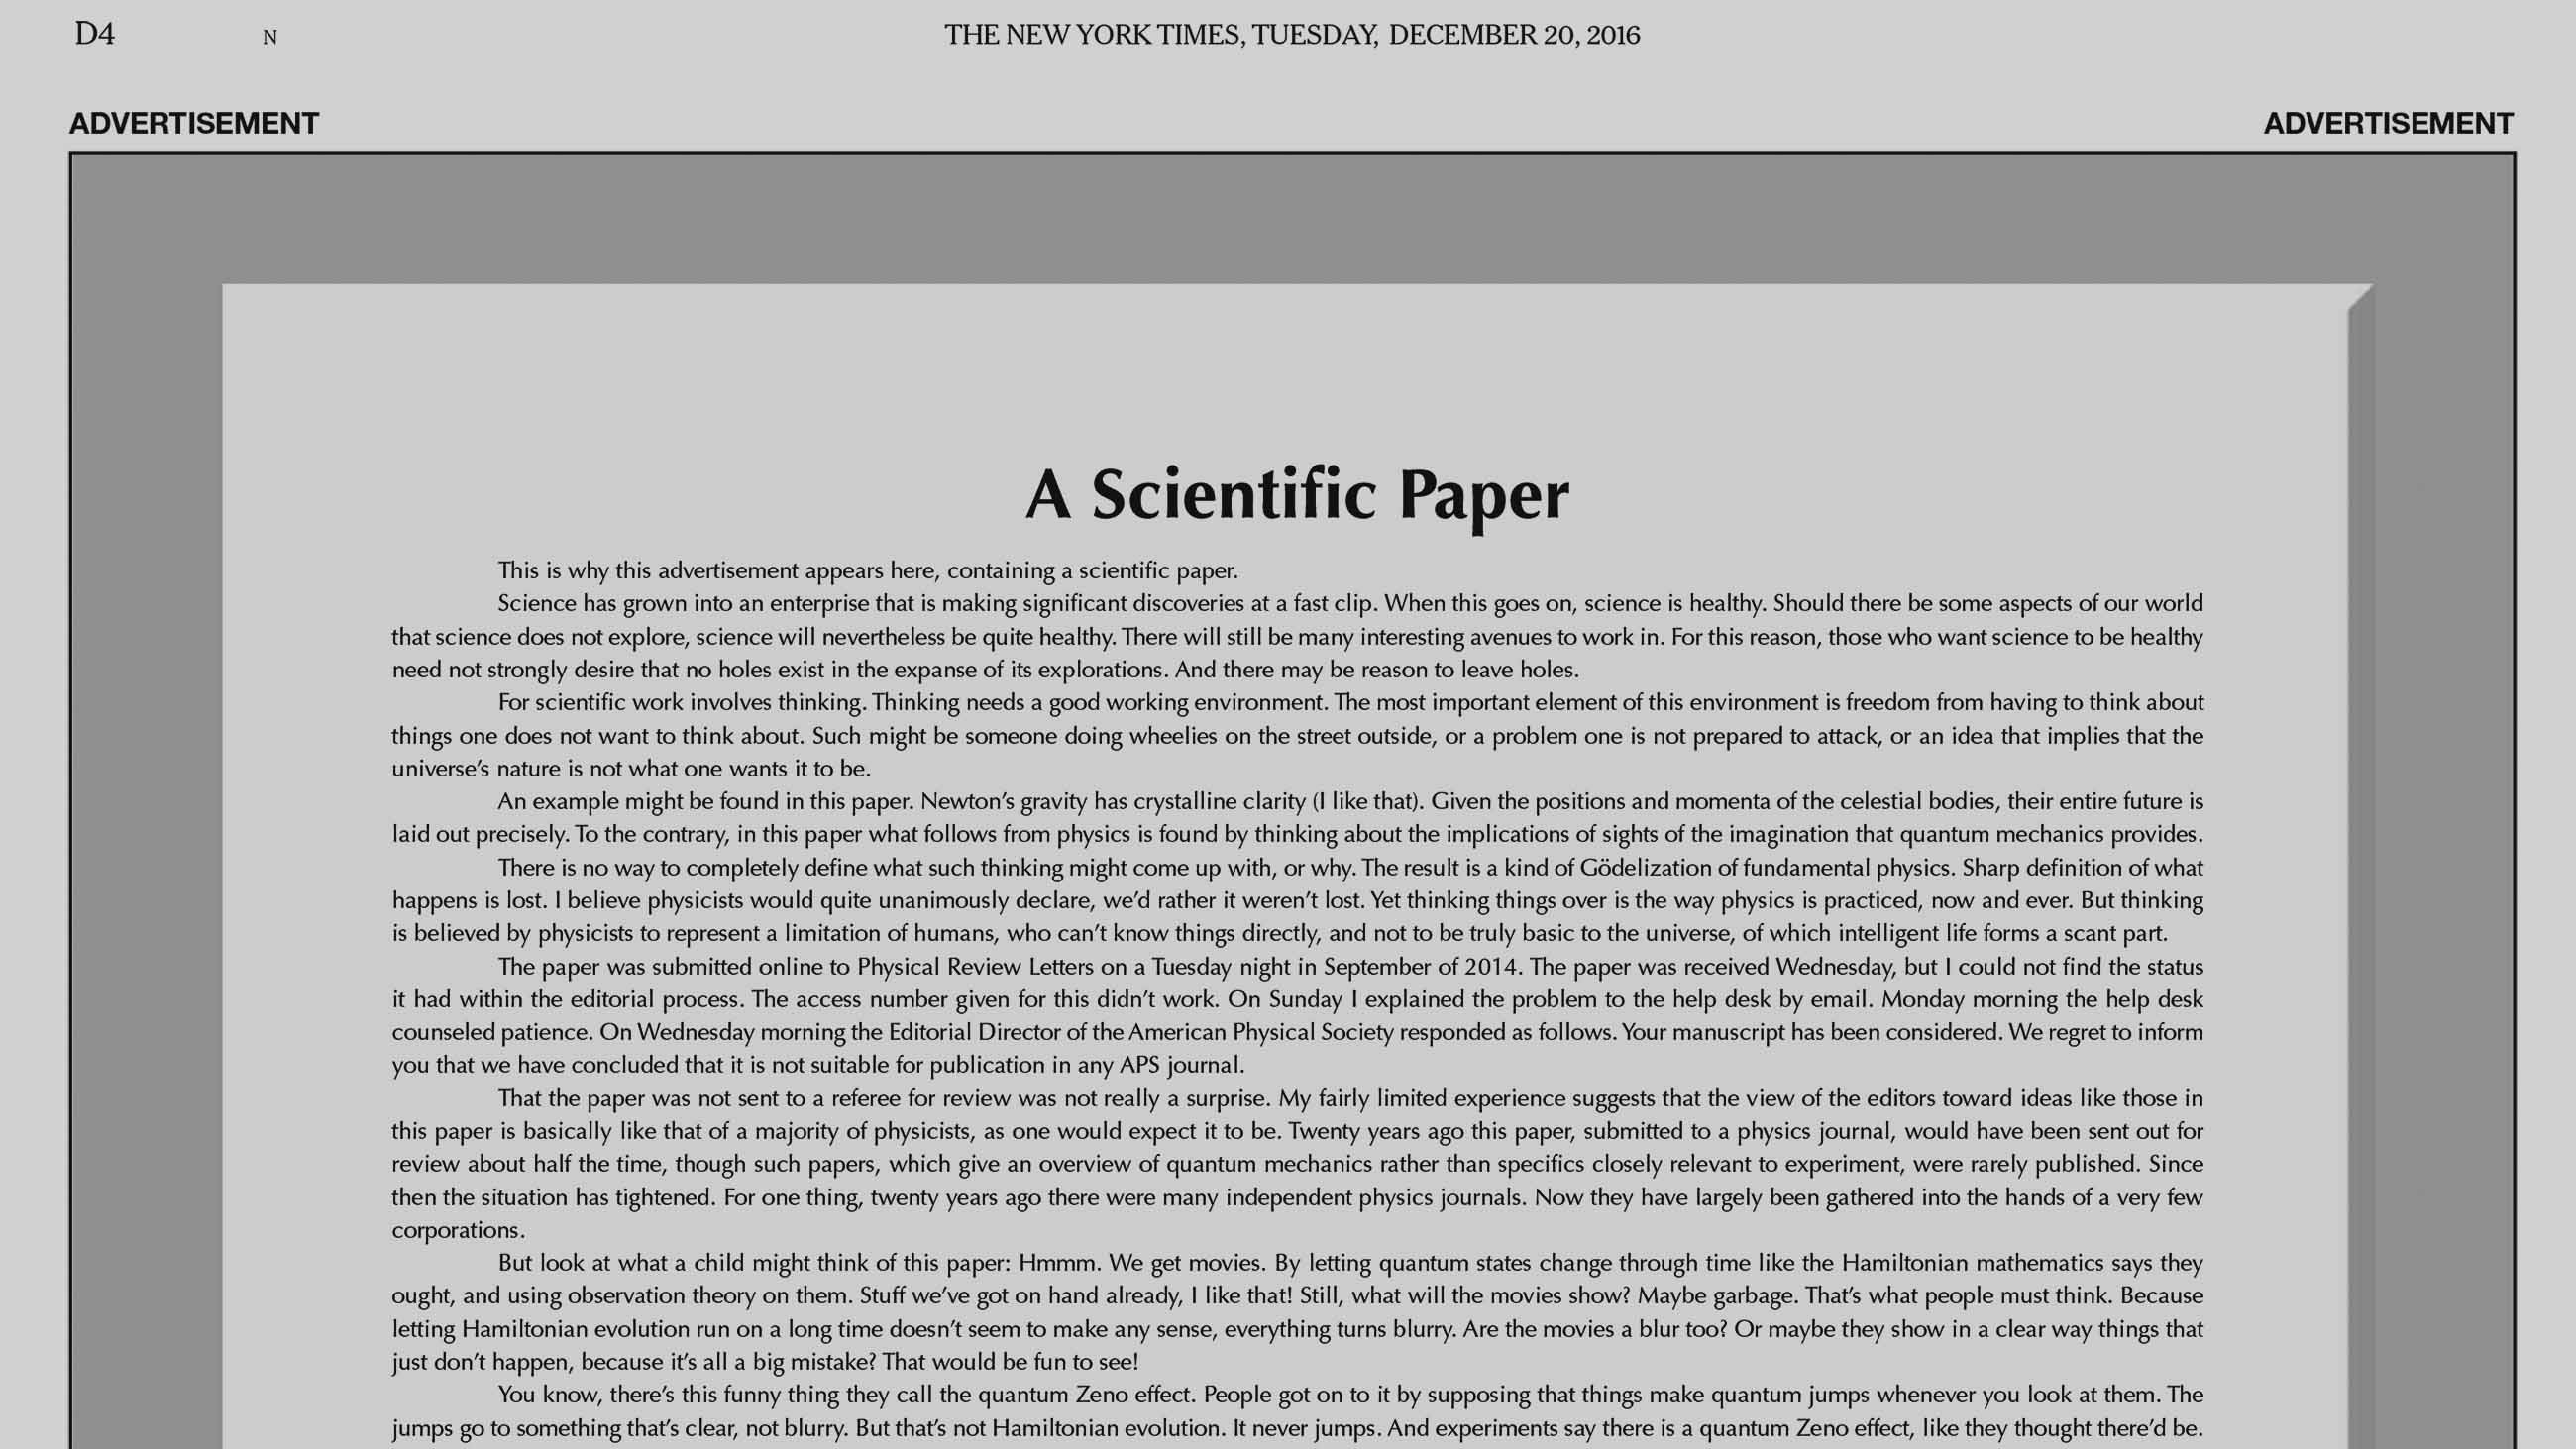 Donald McCartor couldn't get his scientific paper published in a journal. So he published it as an advertisement in The New York Times.